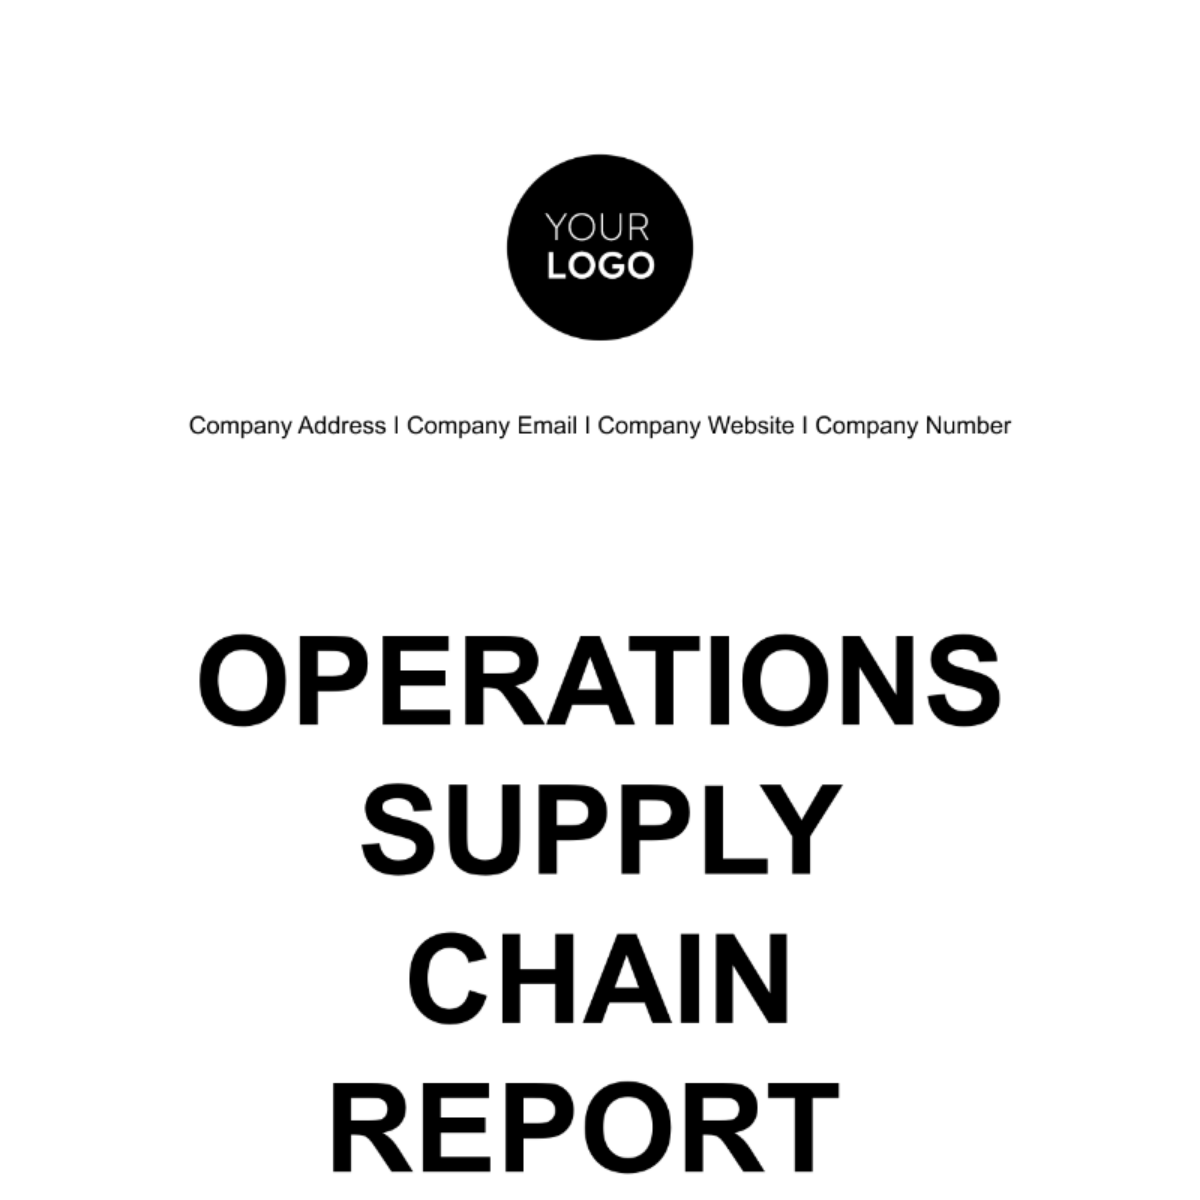 Operations Supply Chain Report Template